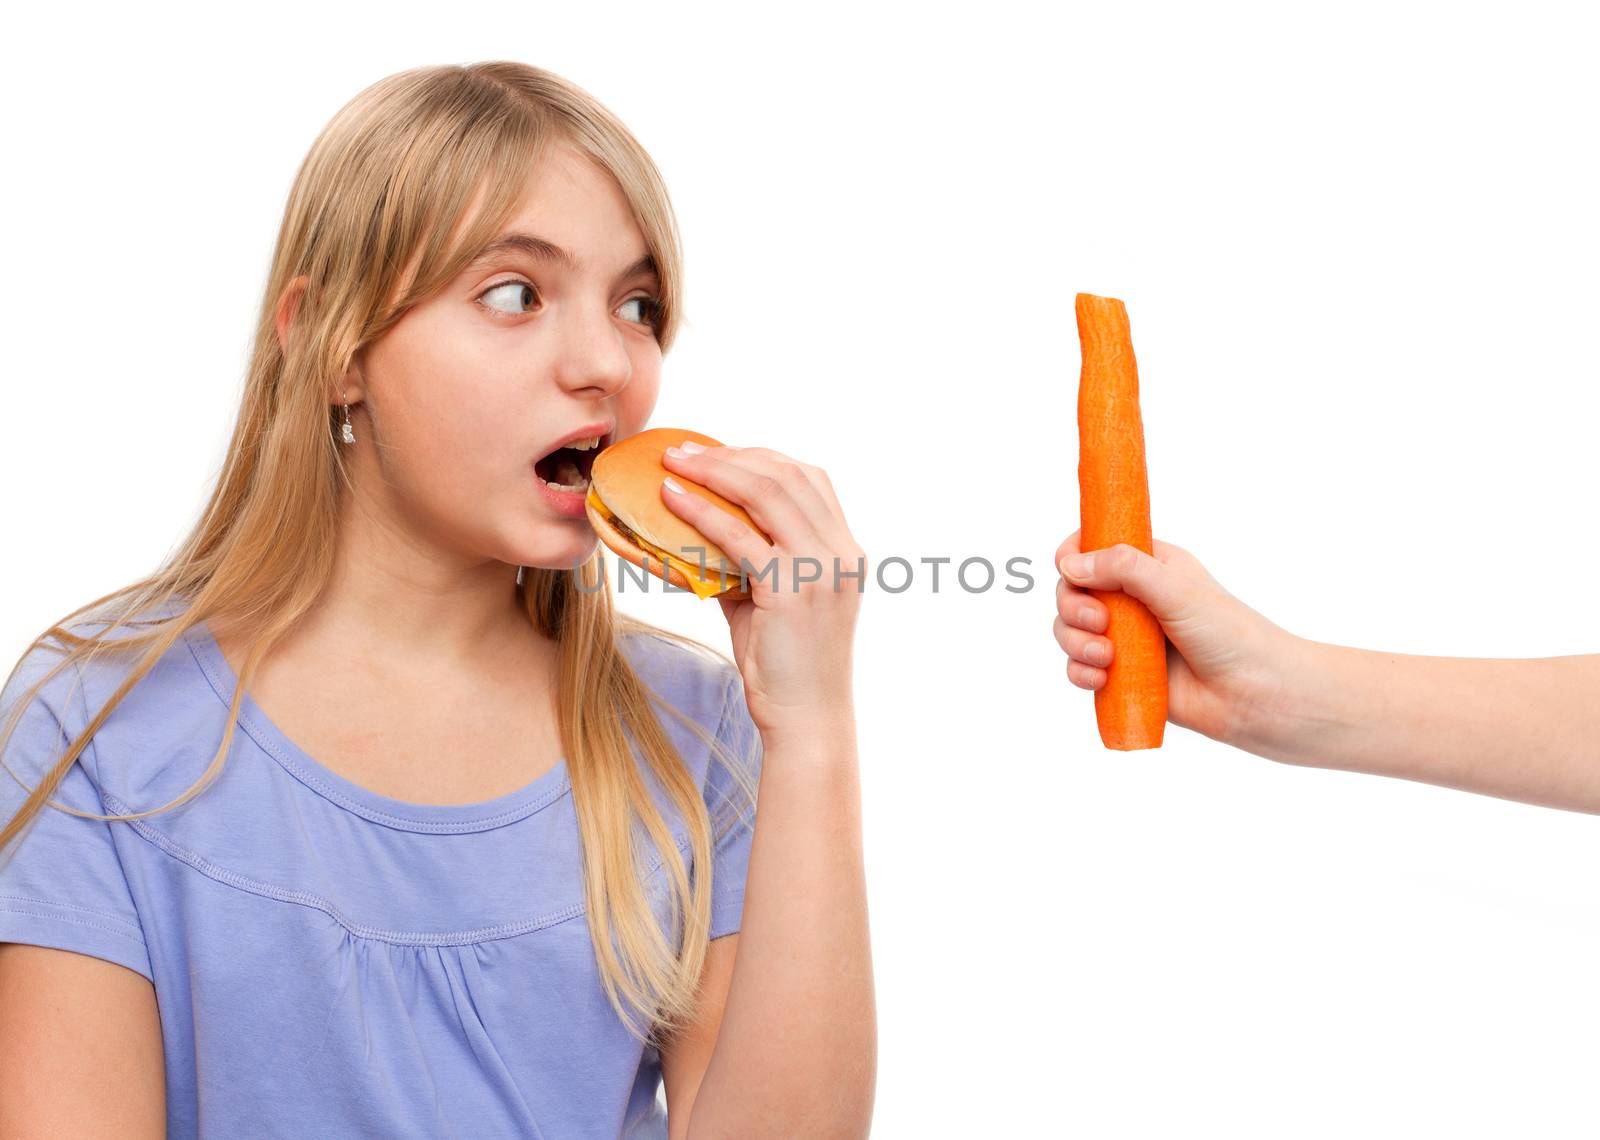 Young female eating a cheeseburger looking at a hand holding a carrot. Isolated on white.